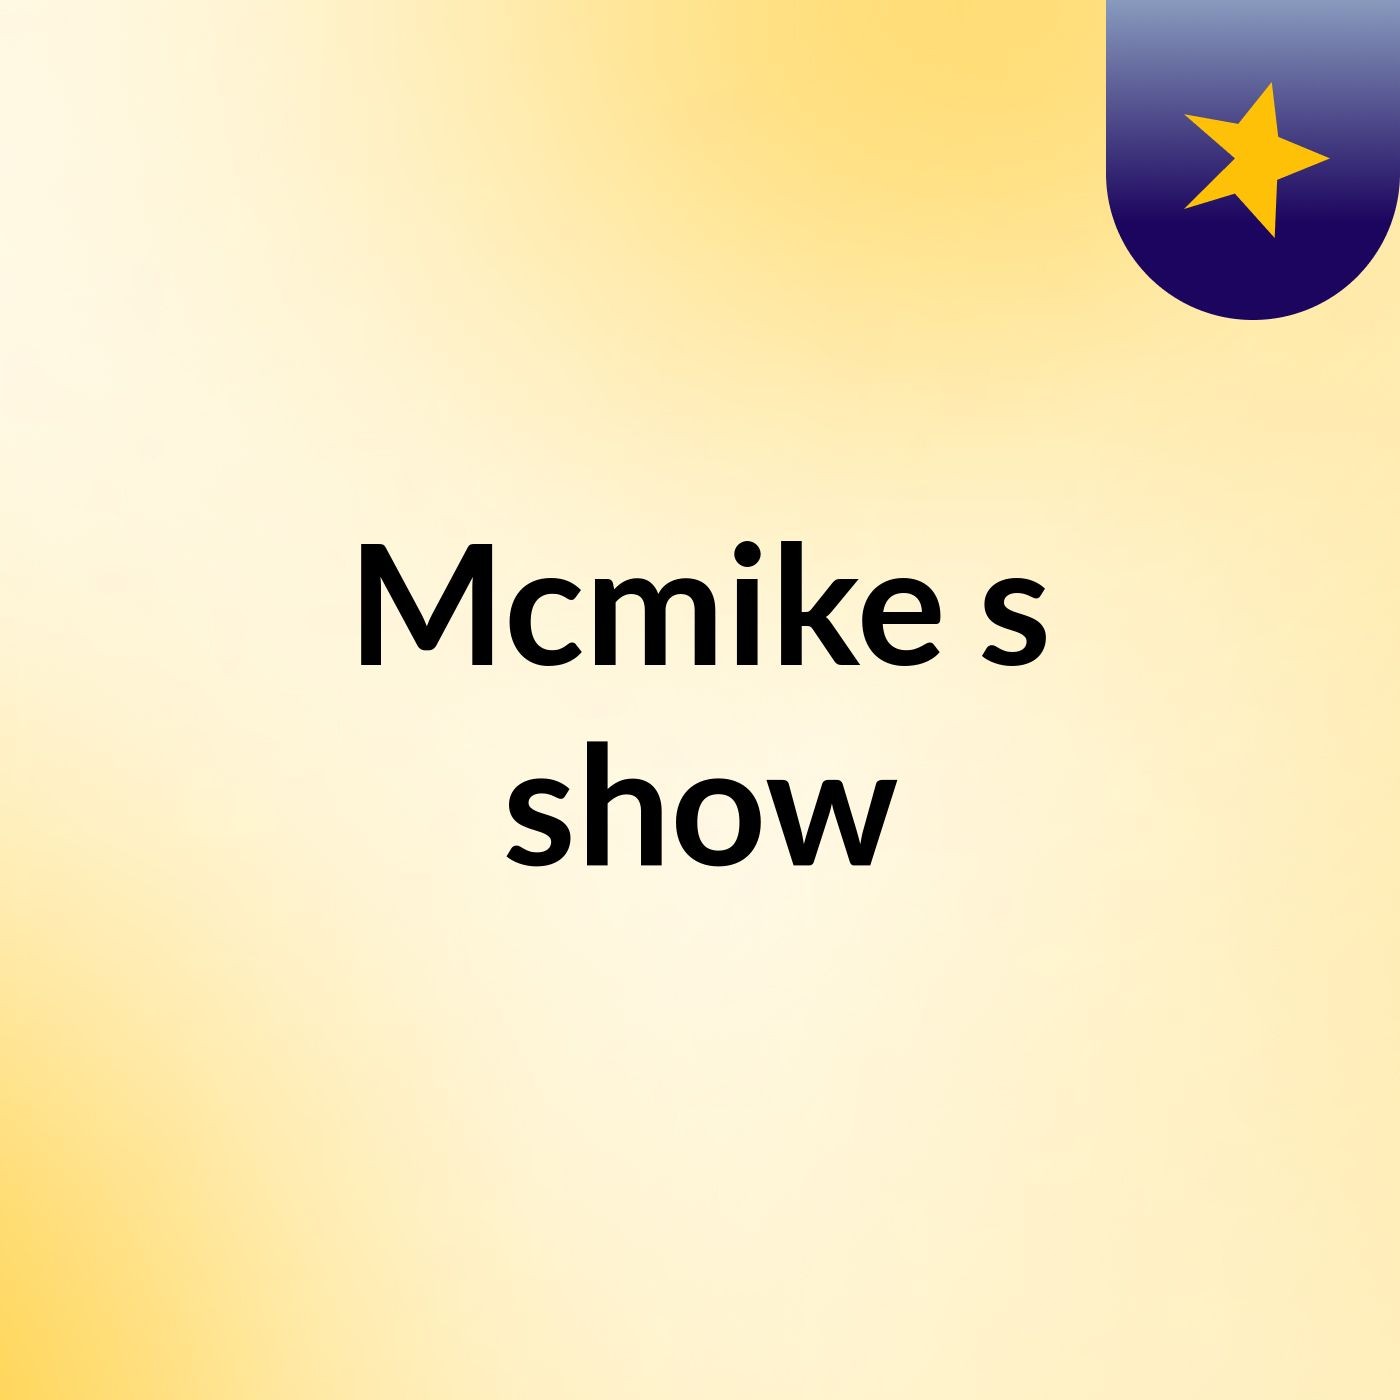 Mcmike's show